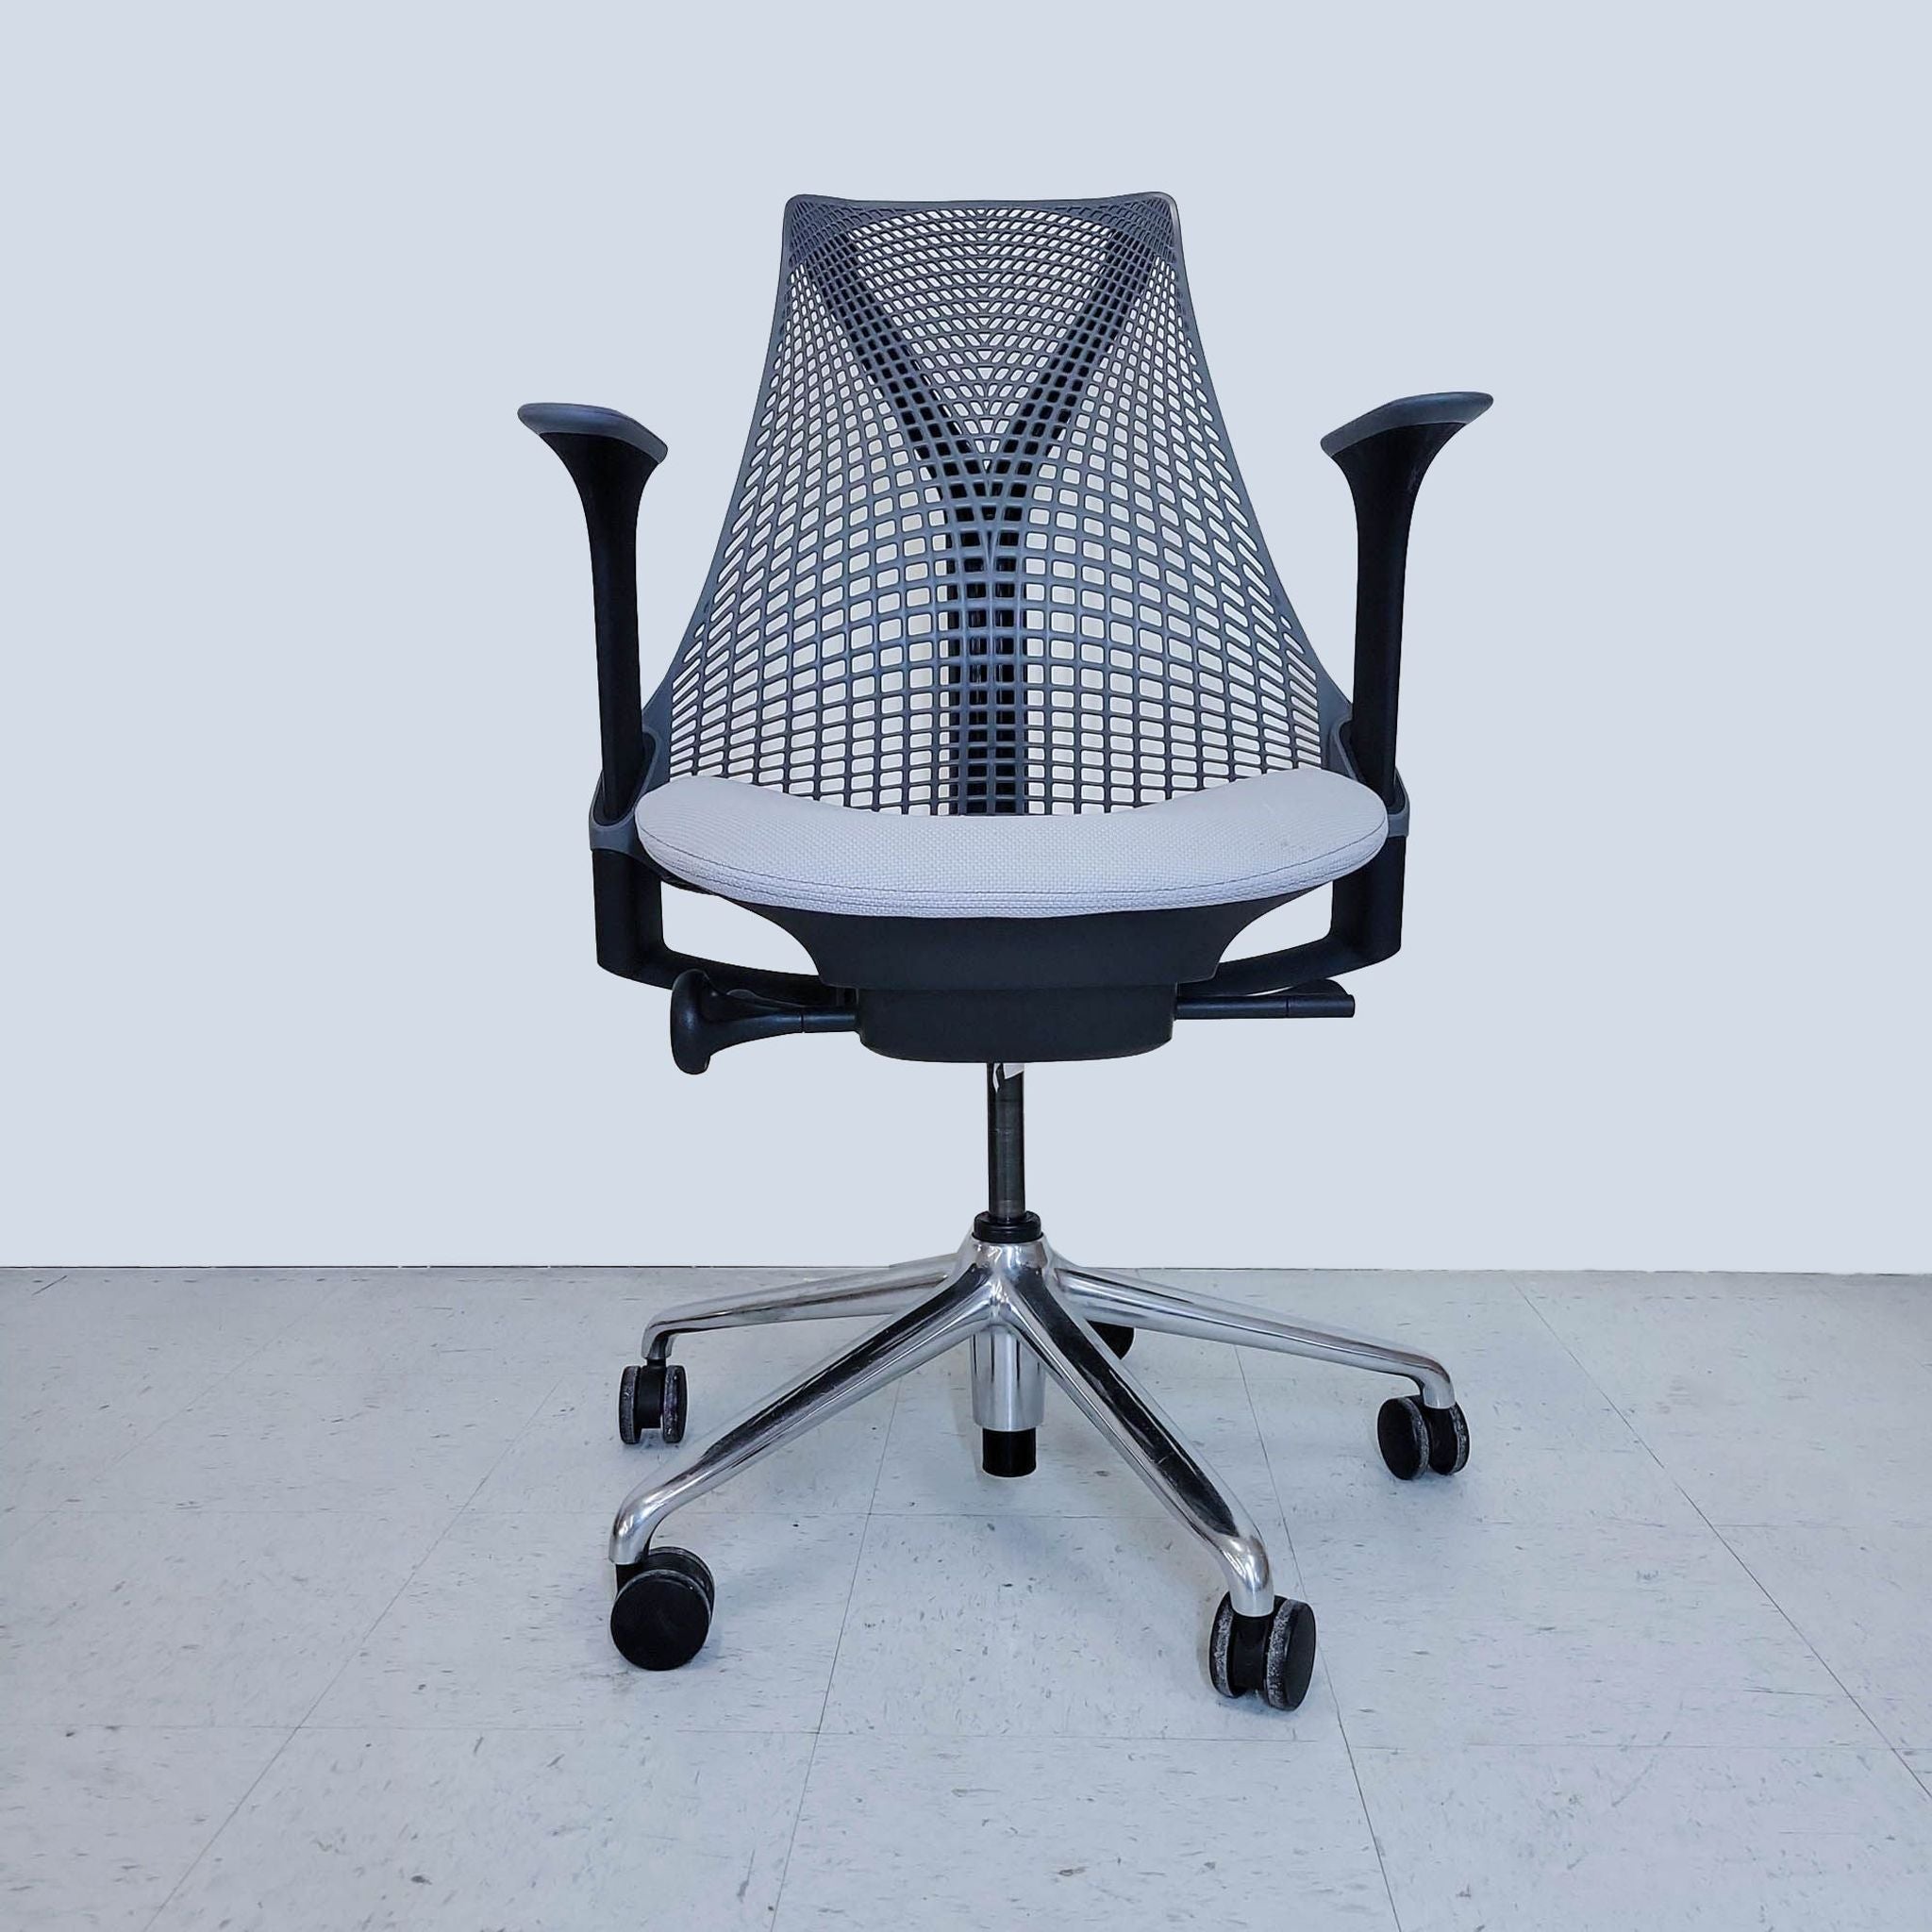 Herman Miller chair with a mesh back, armrests, and a five-star base with casters, on a grey background.